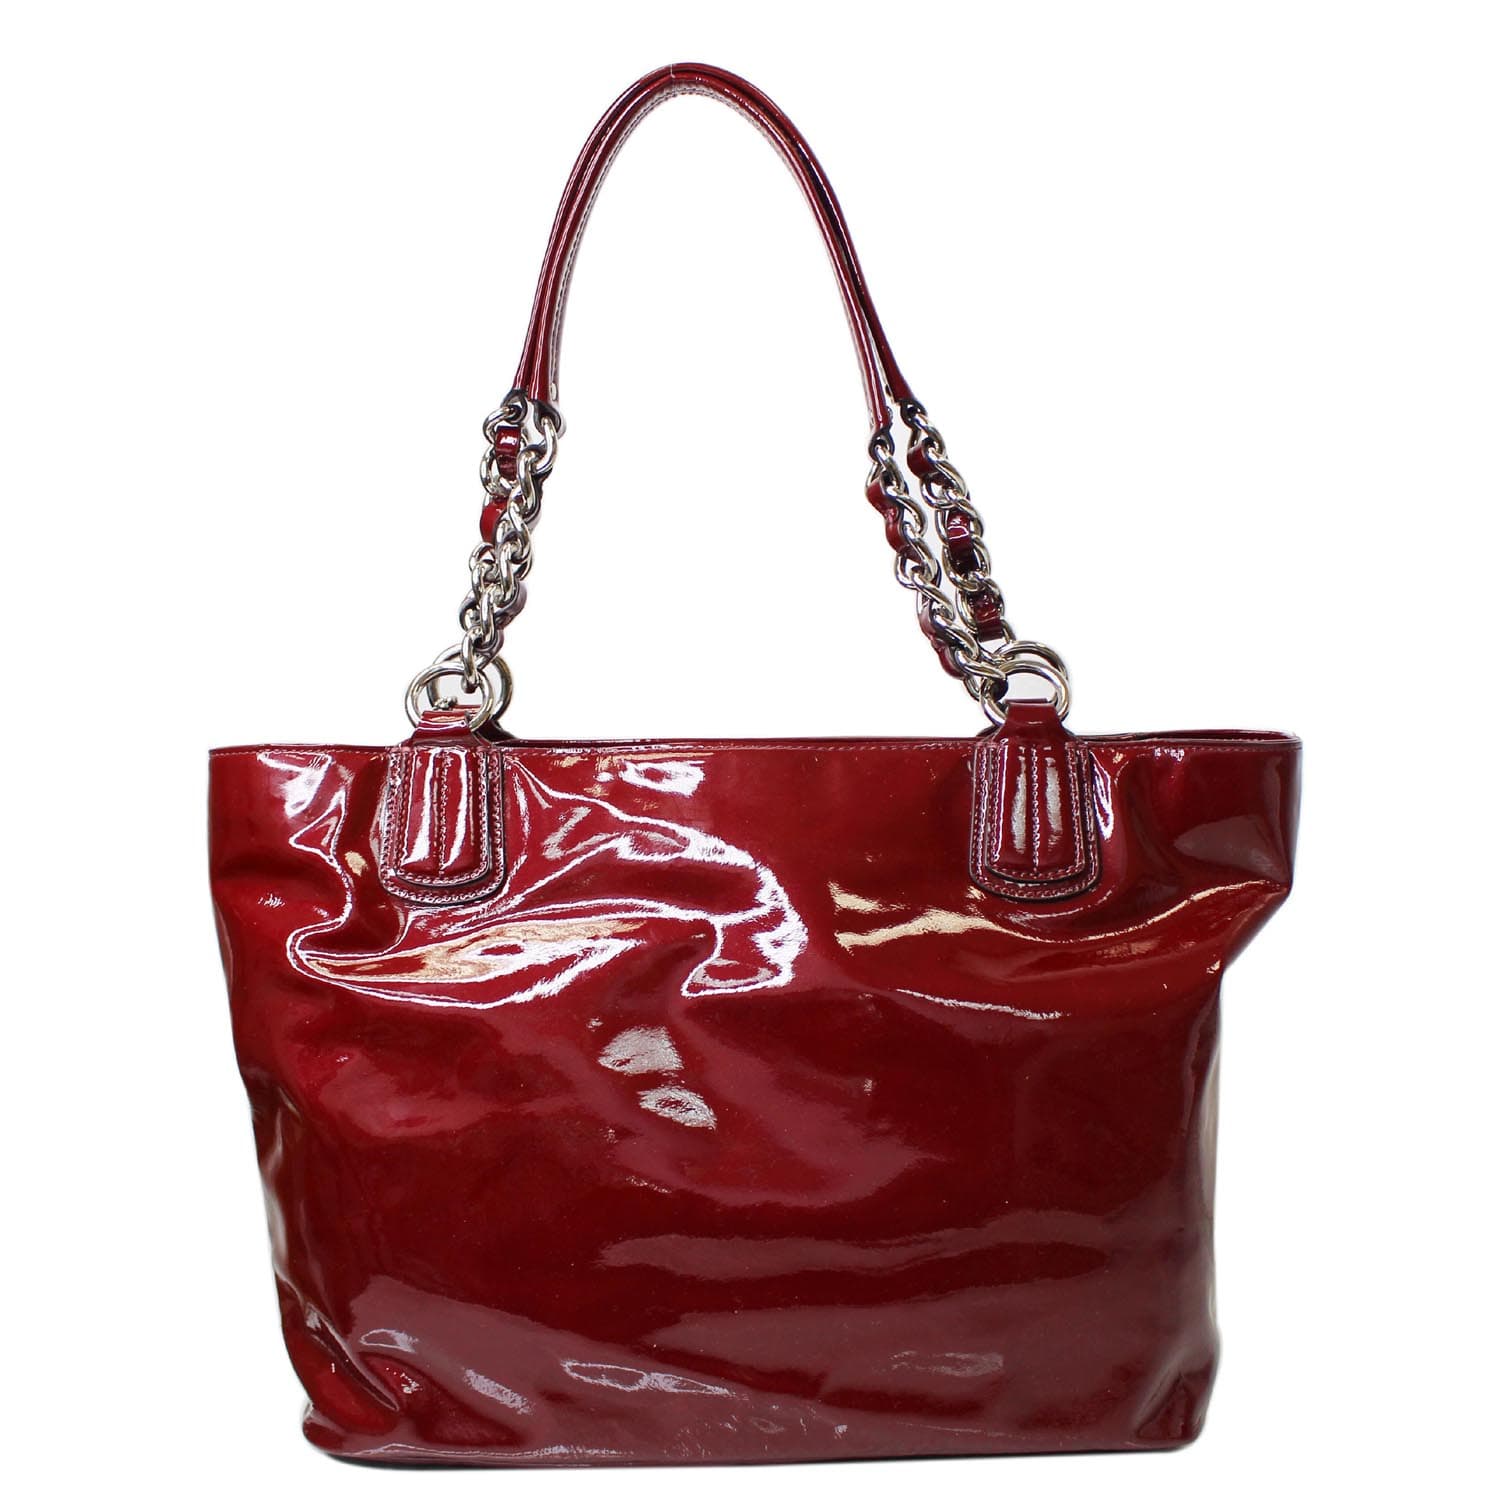 Emery Tote Red Patent Leather Tote Bag - Schandra